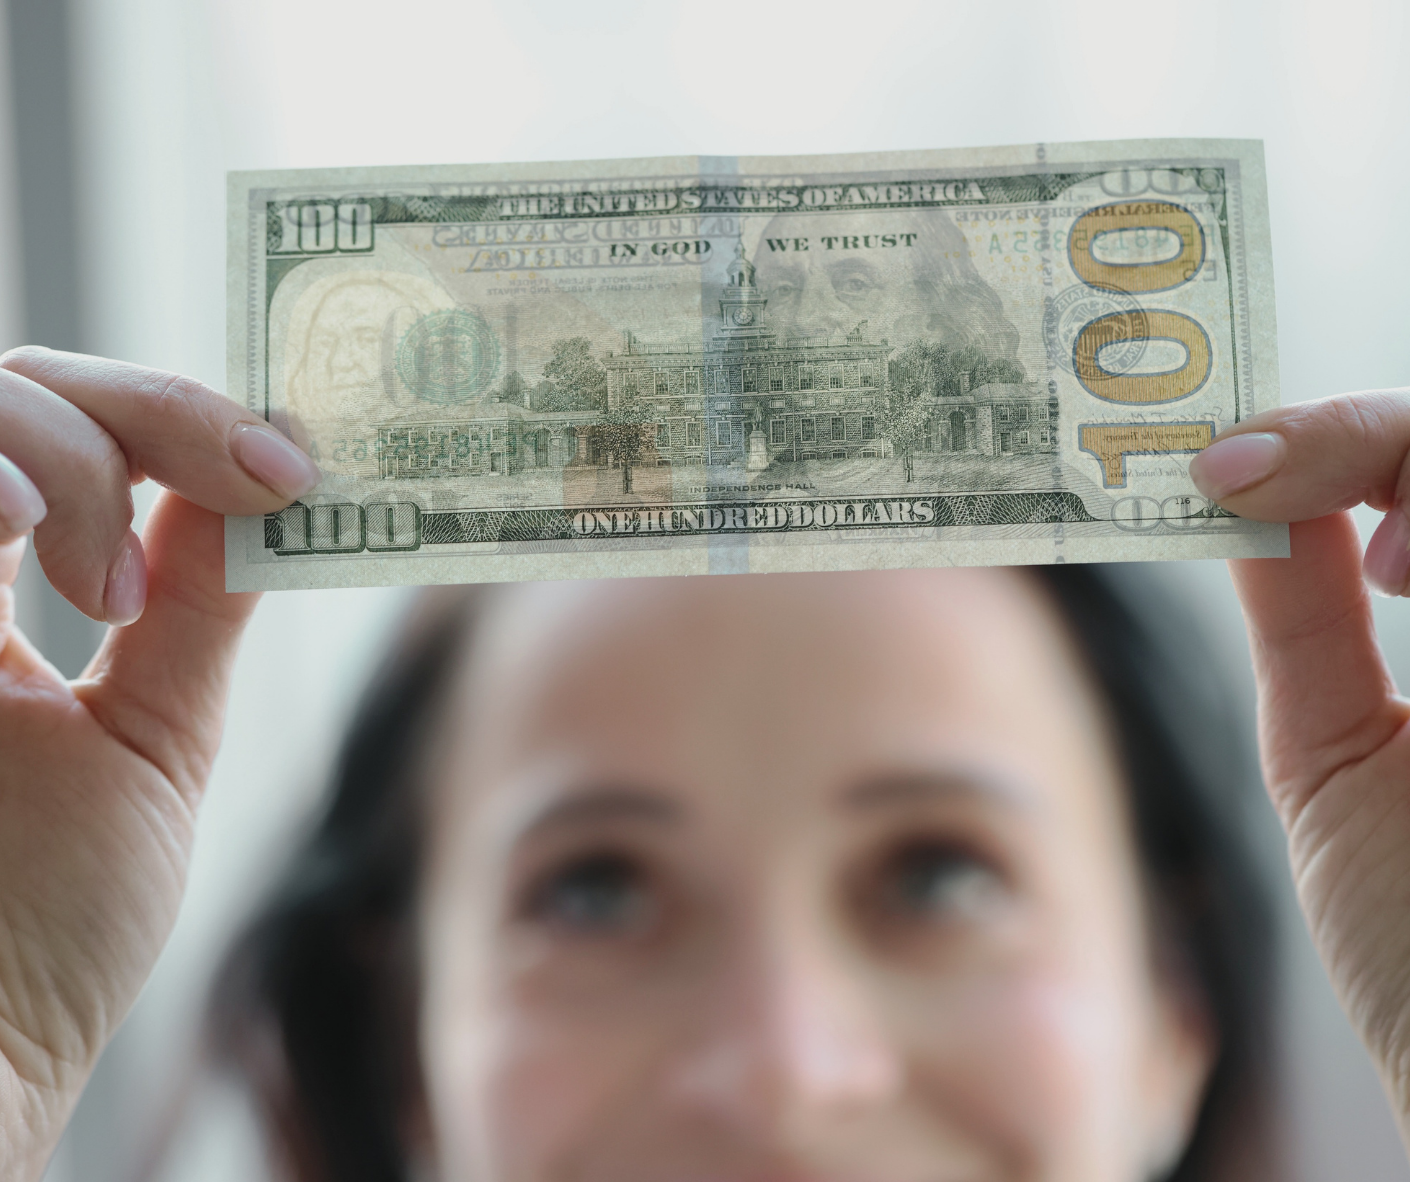 Woman holding up a shared $100 bill